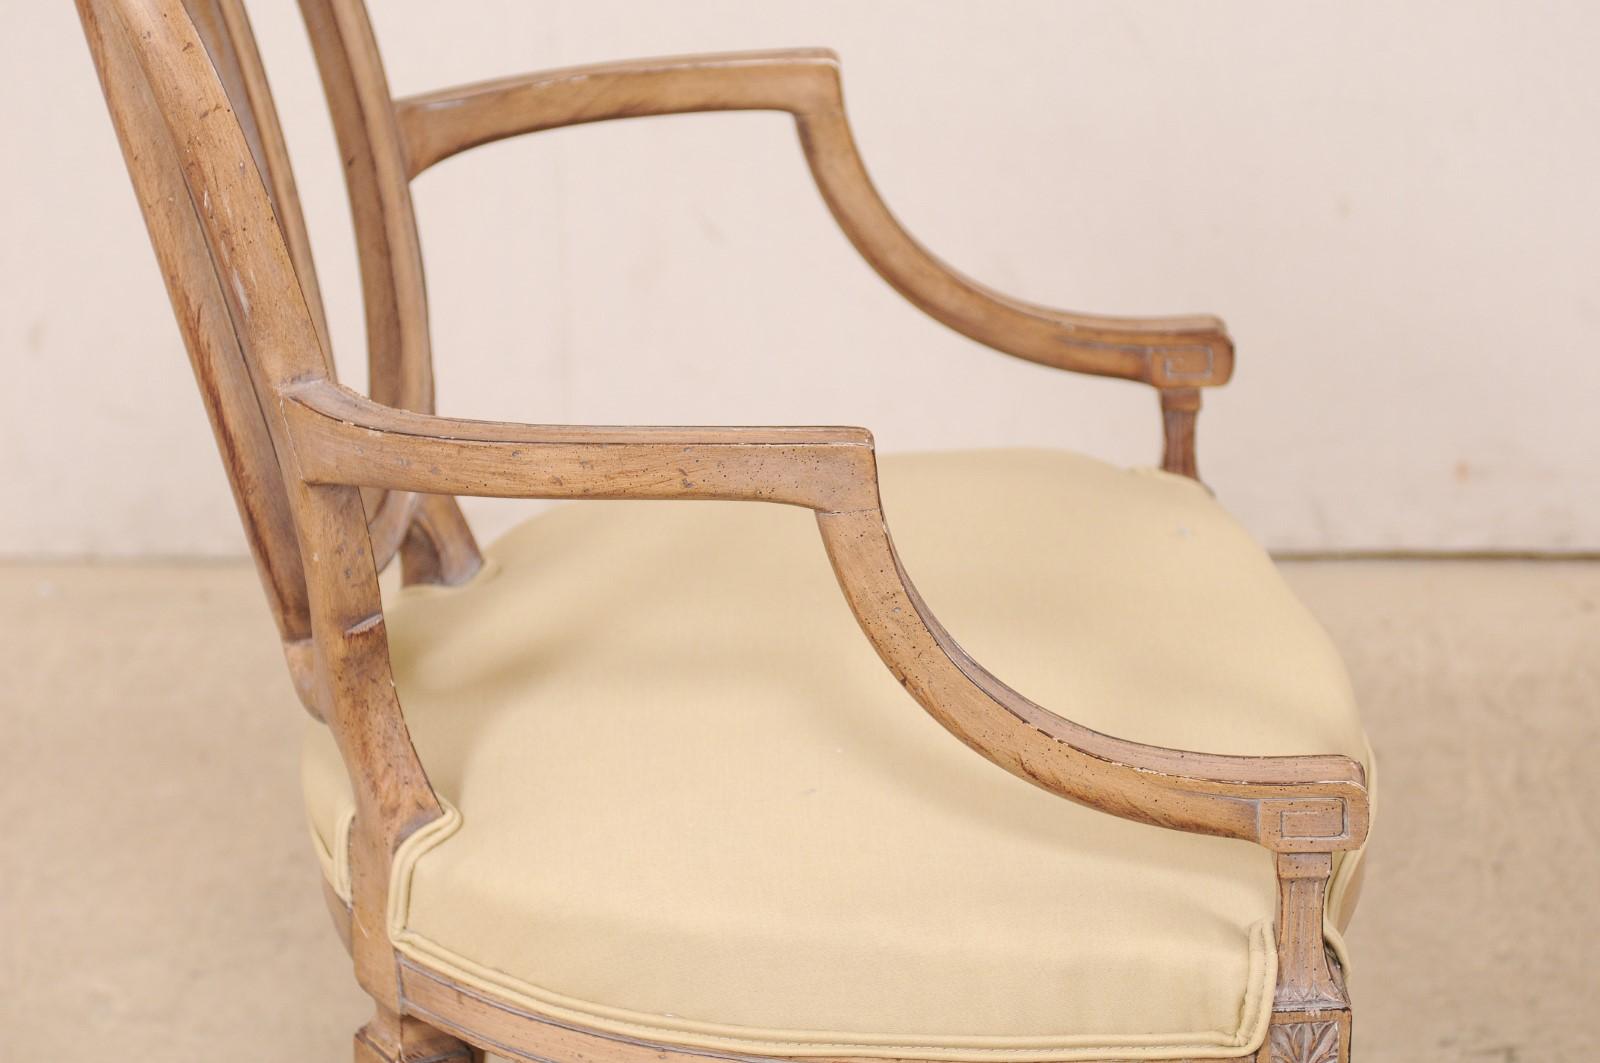 Italian Pair of Carved-Wood Armchairs with Upholstered Seats, Mid-20th Century For Sale 2